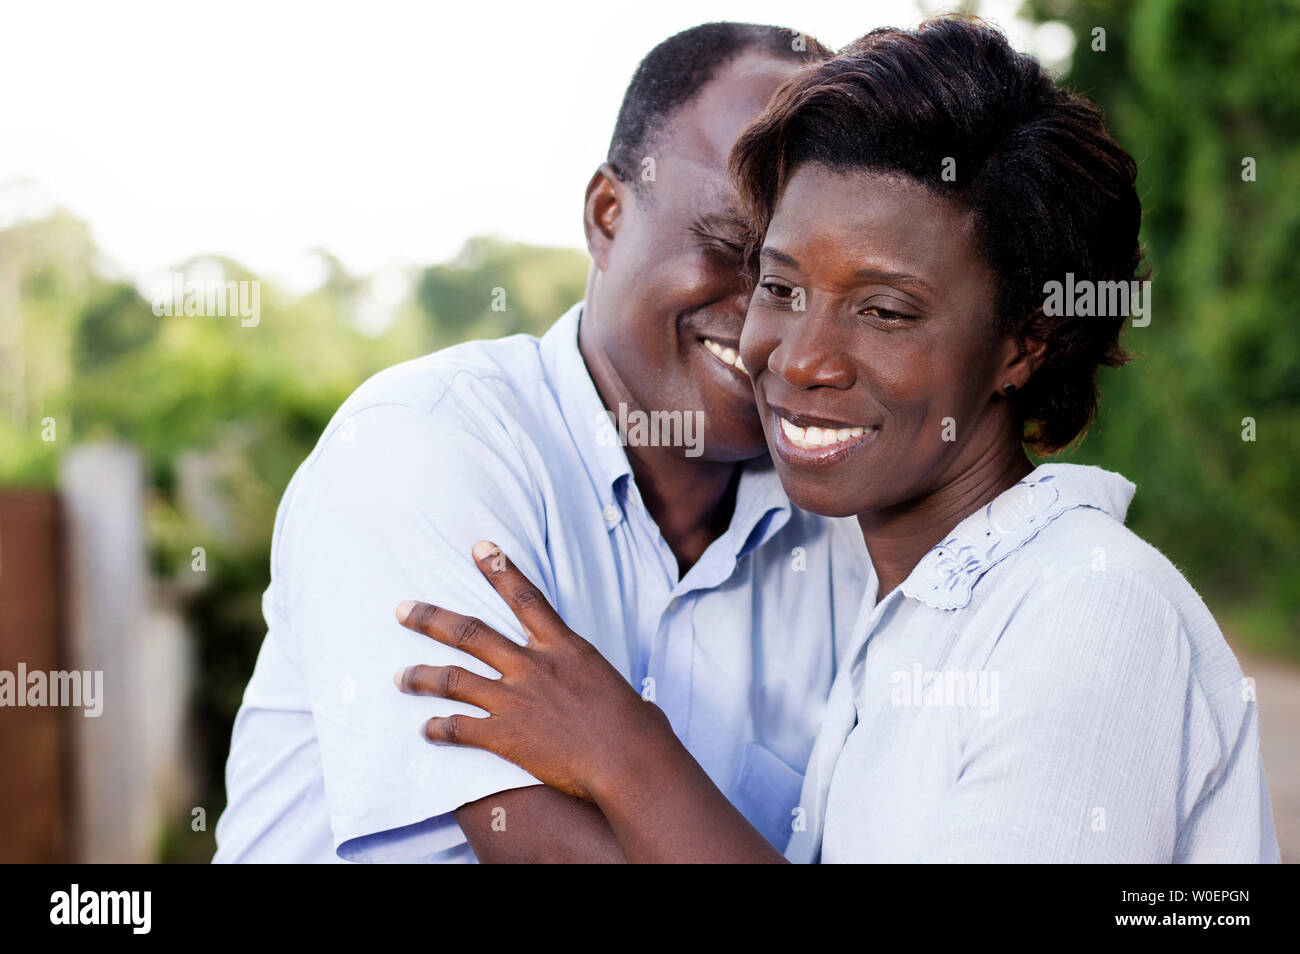 This gentleman said something to his companion that make them laugh together. Stock Photo